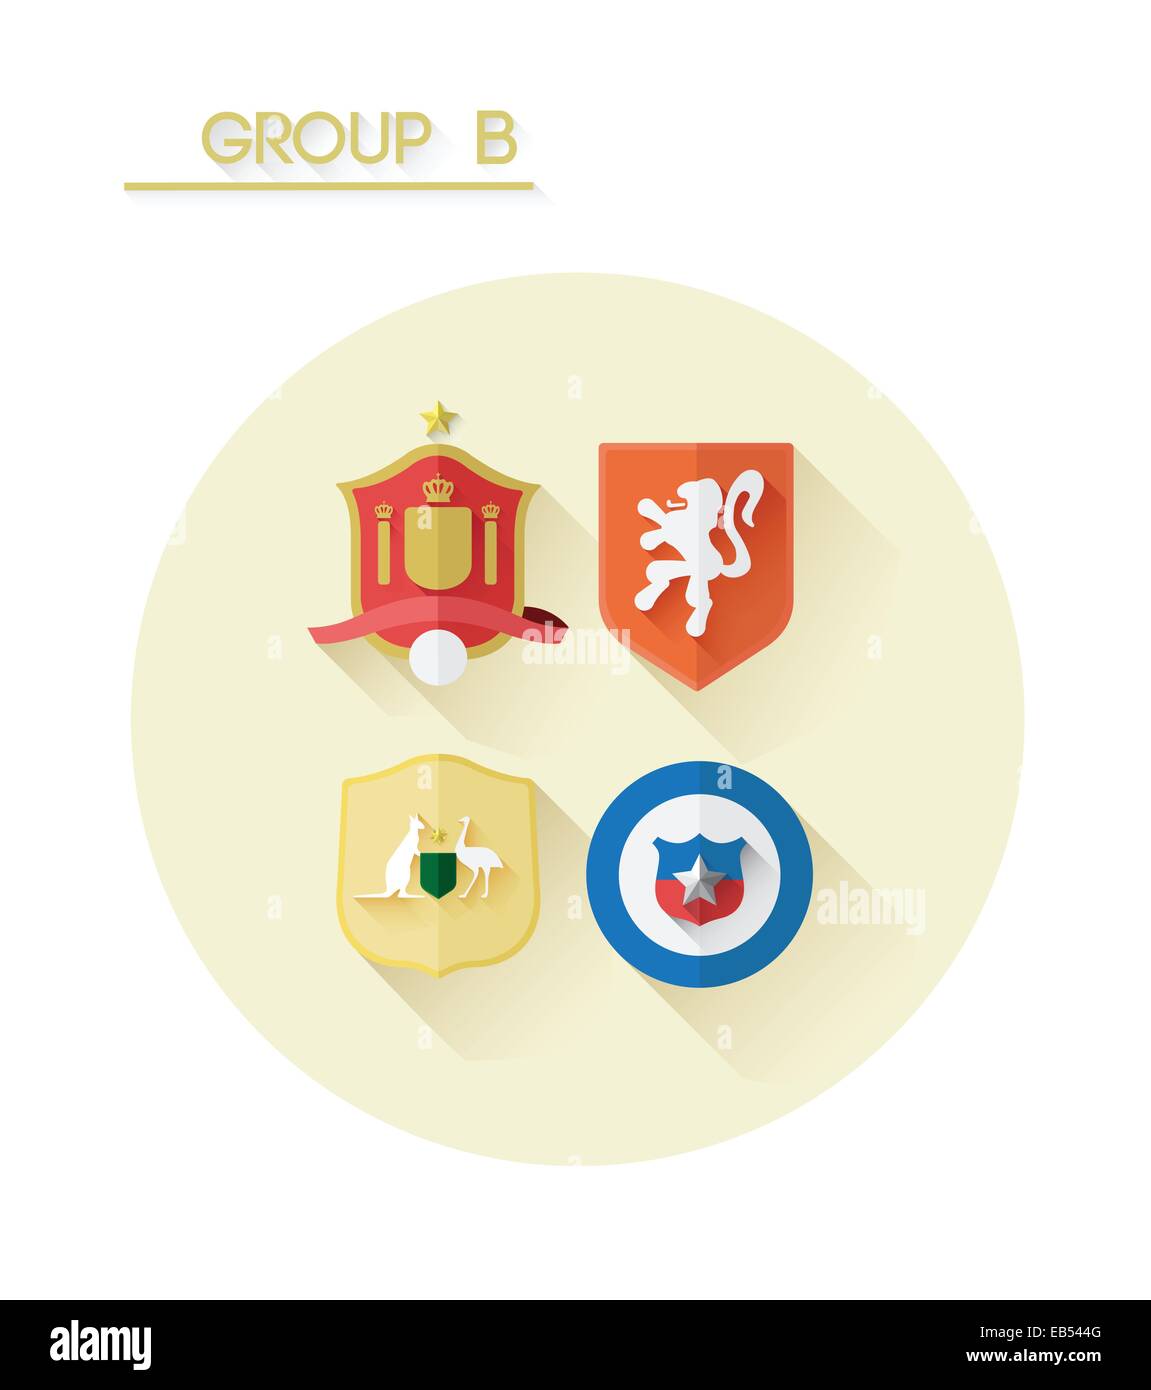 Group b with country crests Stock Vector